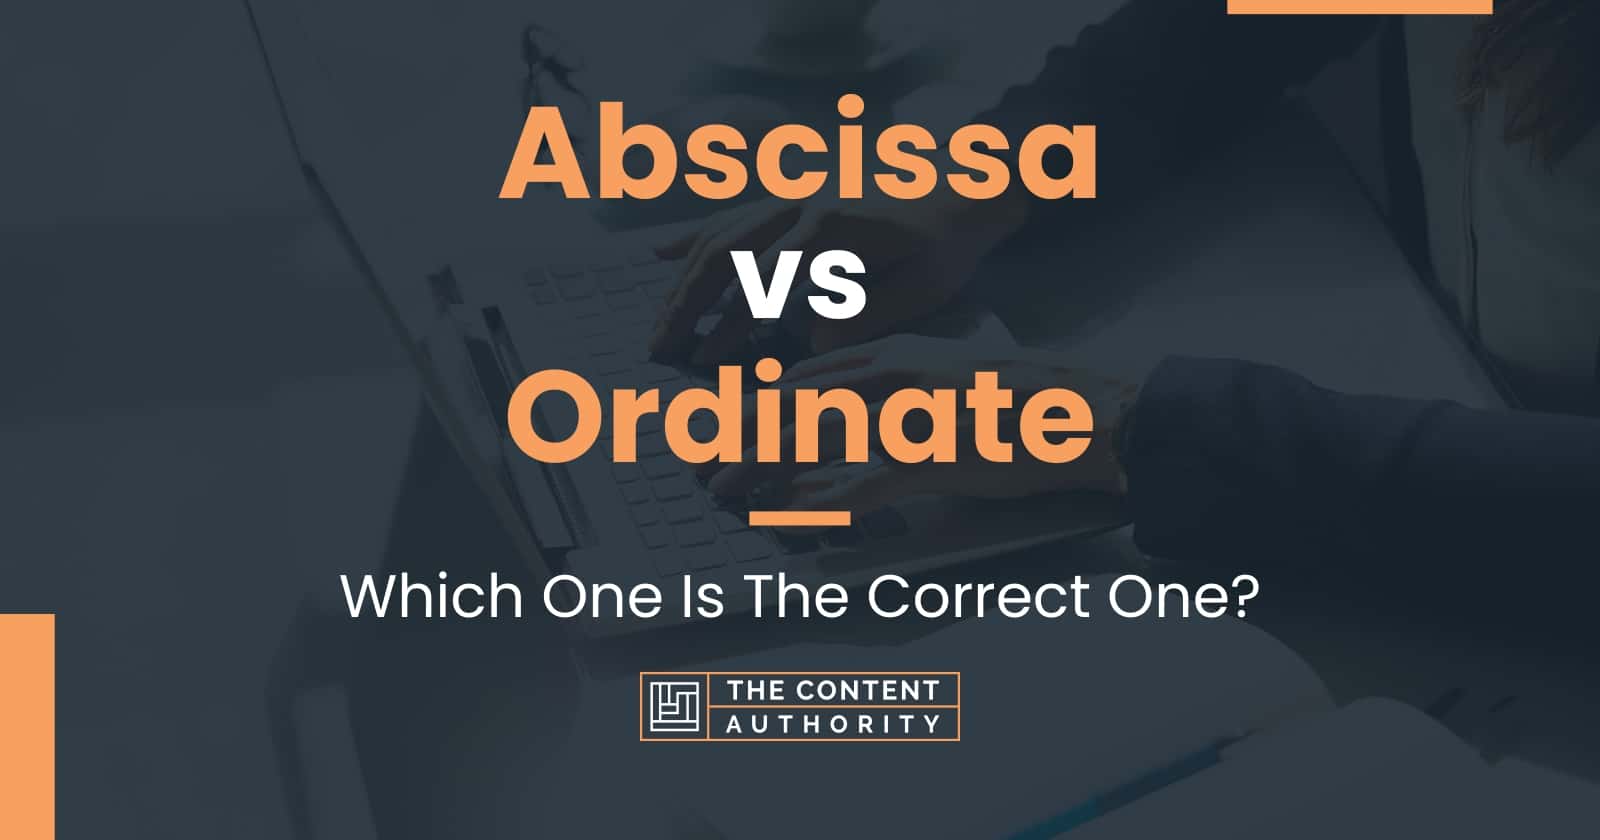 Abscissa vs Ordinate: Which One Is The Correct One?